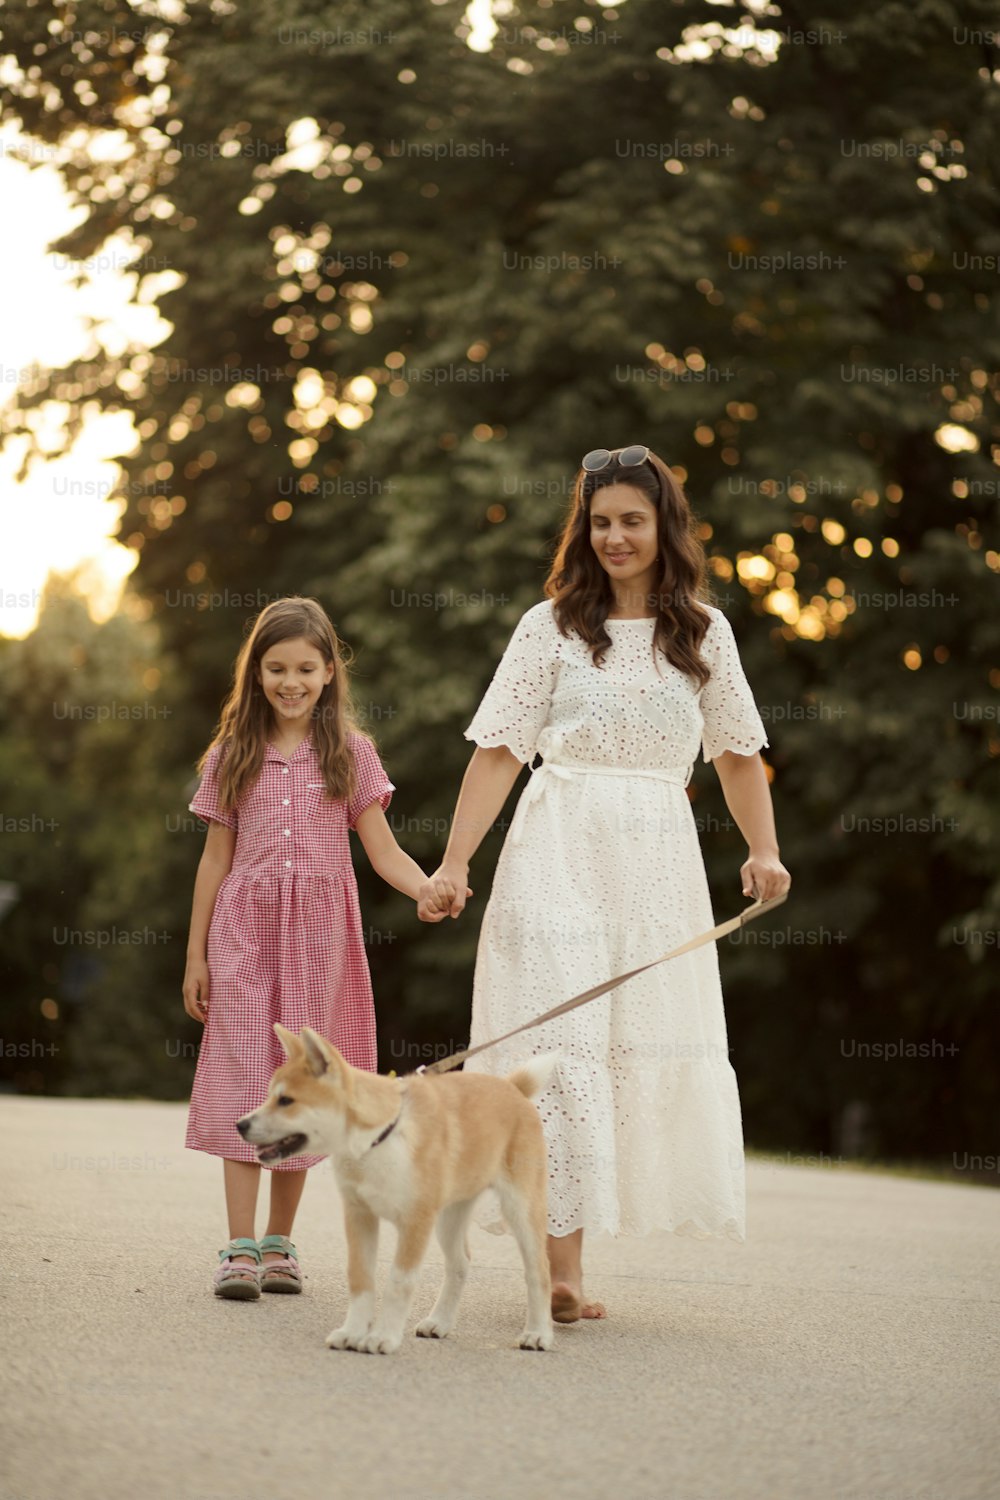 Mother and daughter with their dog.